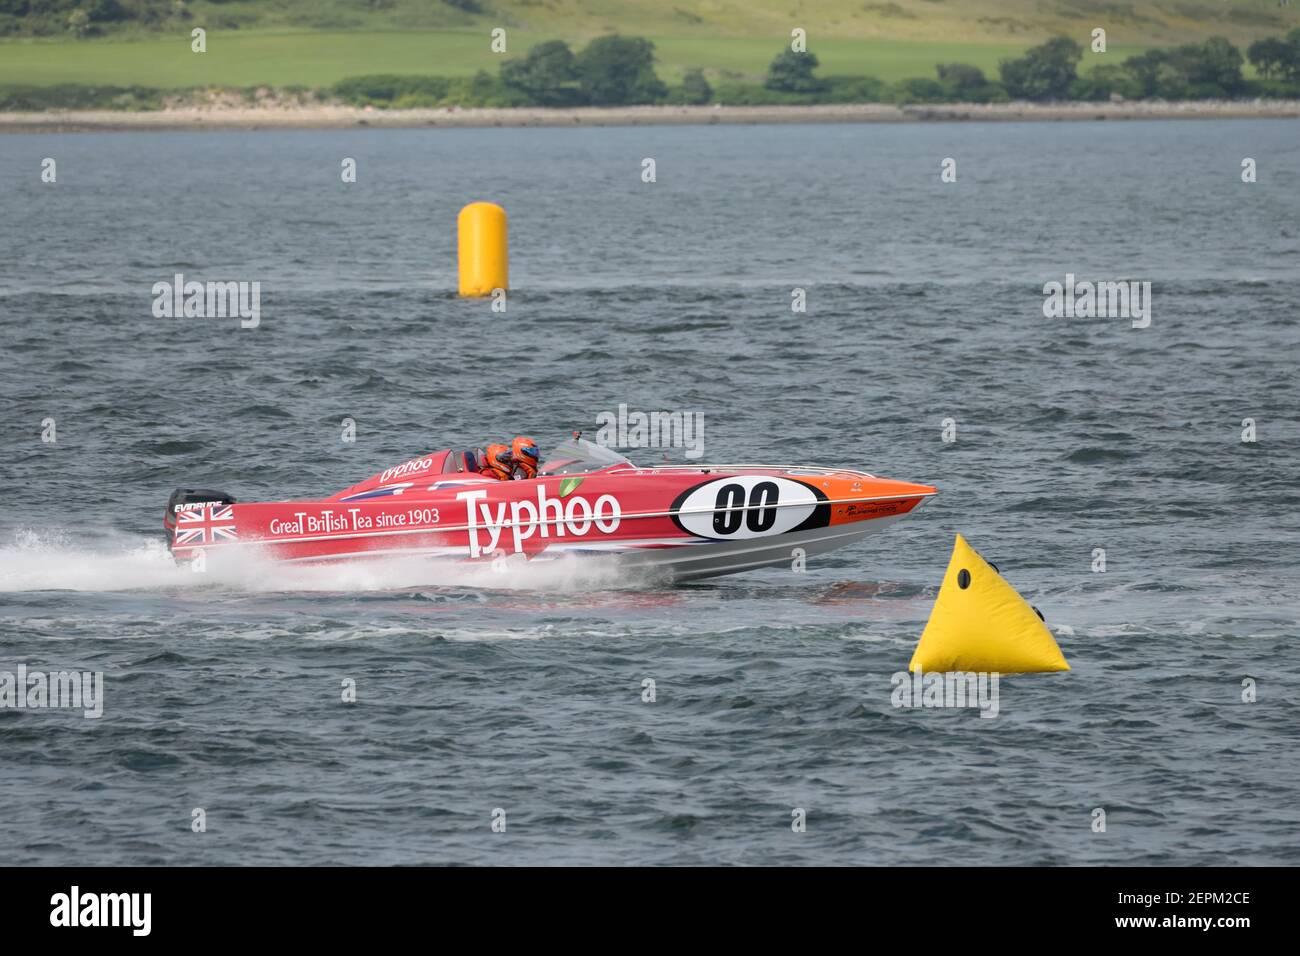 P1 Superstock powerboat racing. With Kevin Hunt steering 00 Ty-phoo at Greenock, Scotland, UK Stock Photo